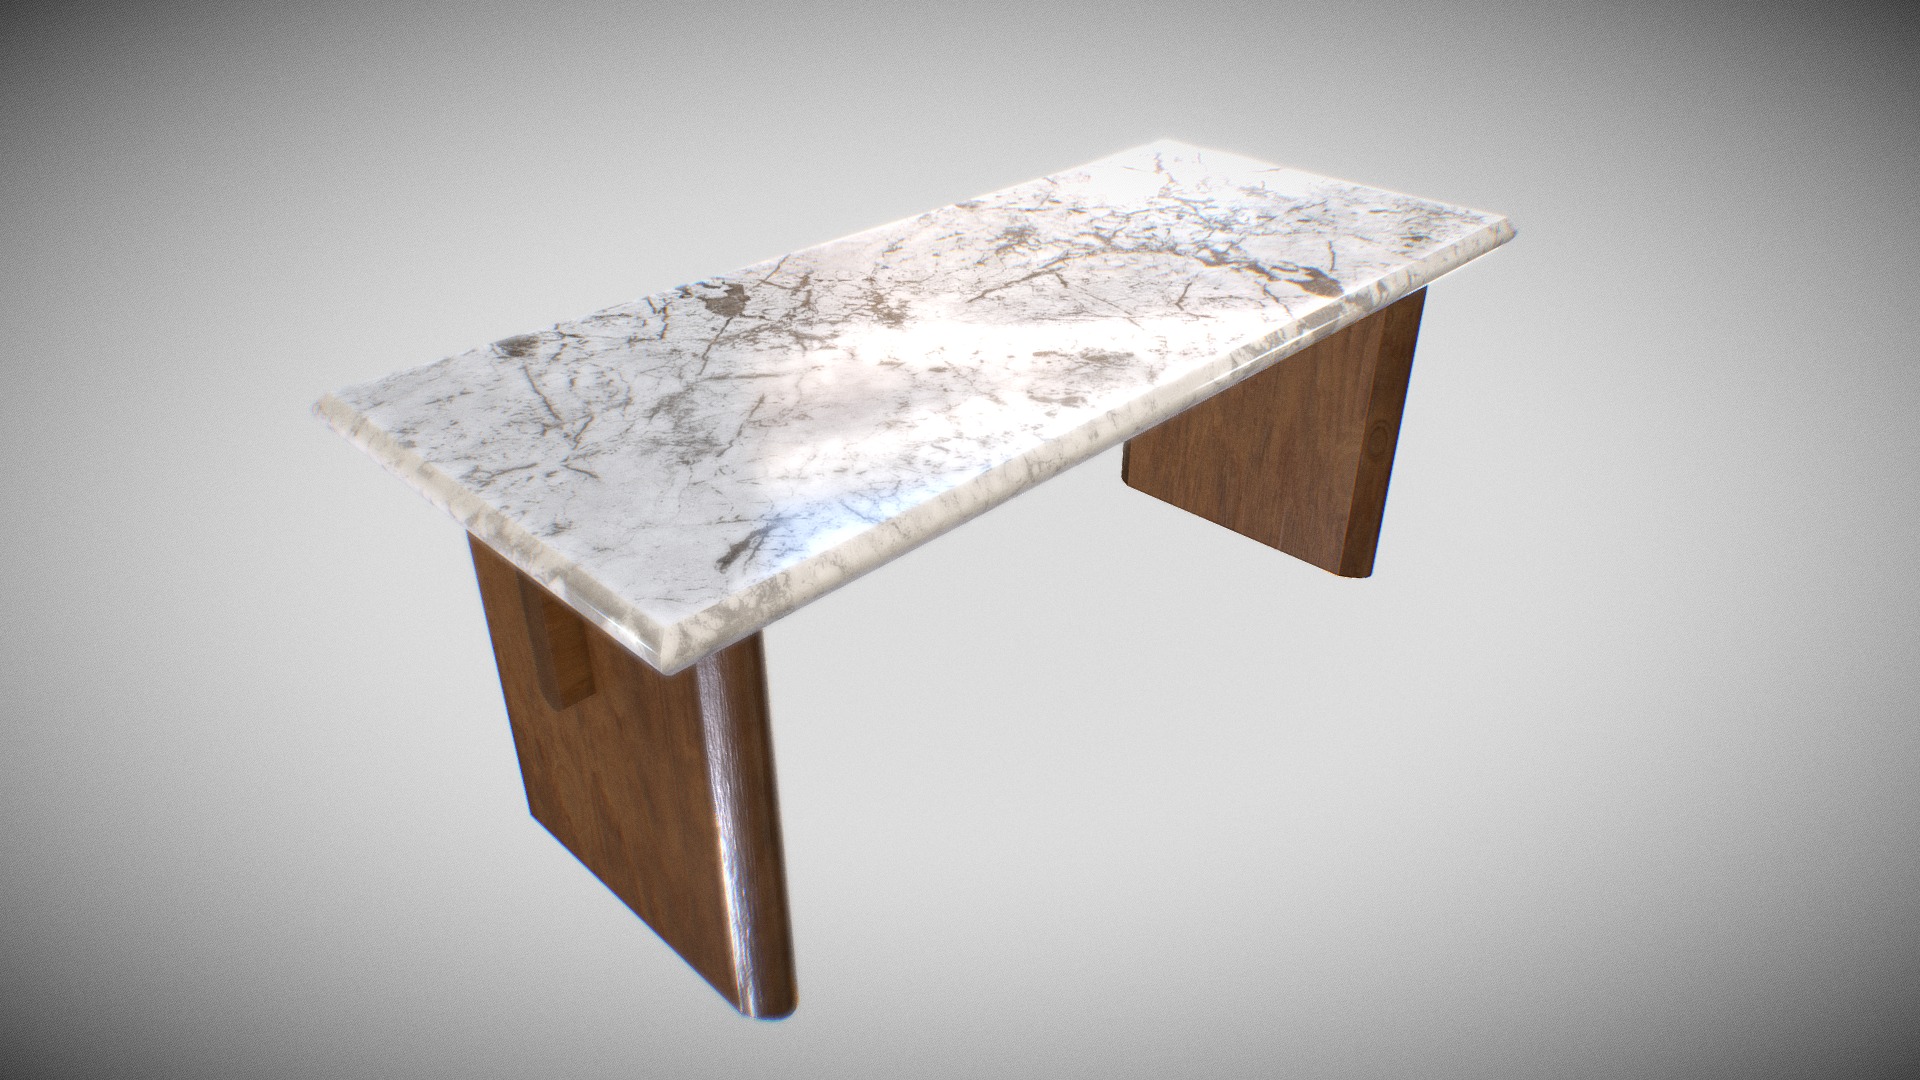 3D model Marble Table 01 - This is a 3D model of the Marble Table 01. The 3D model is about a wooden table covered in snow.